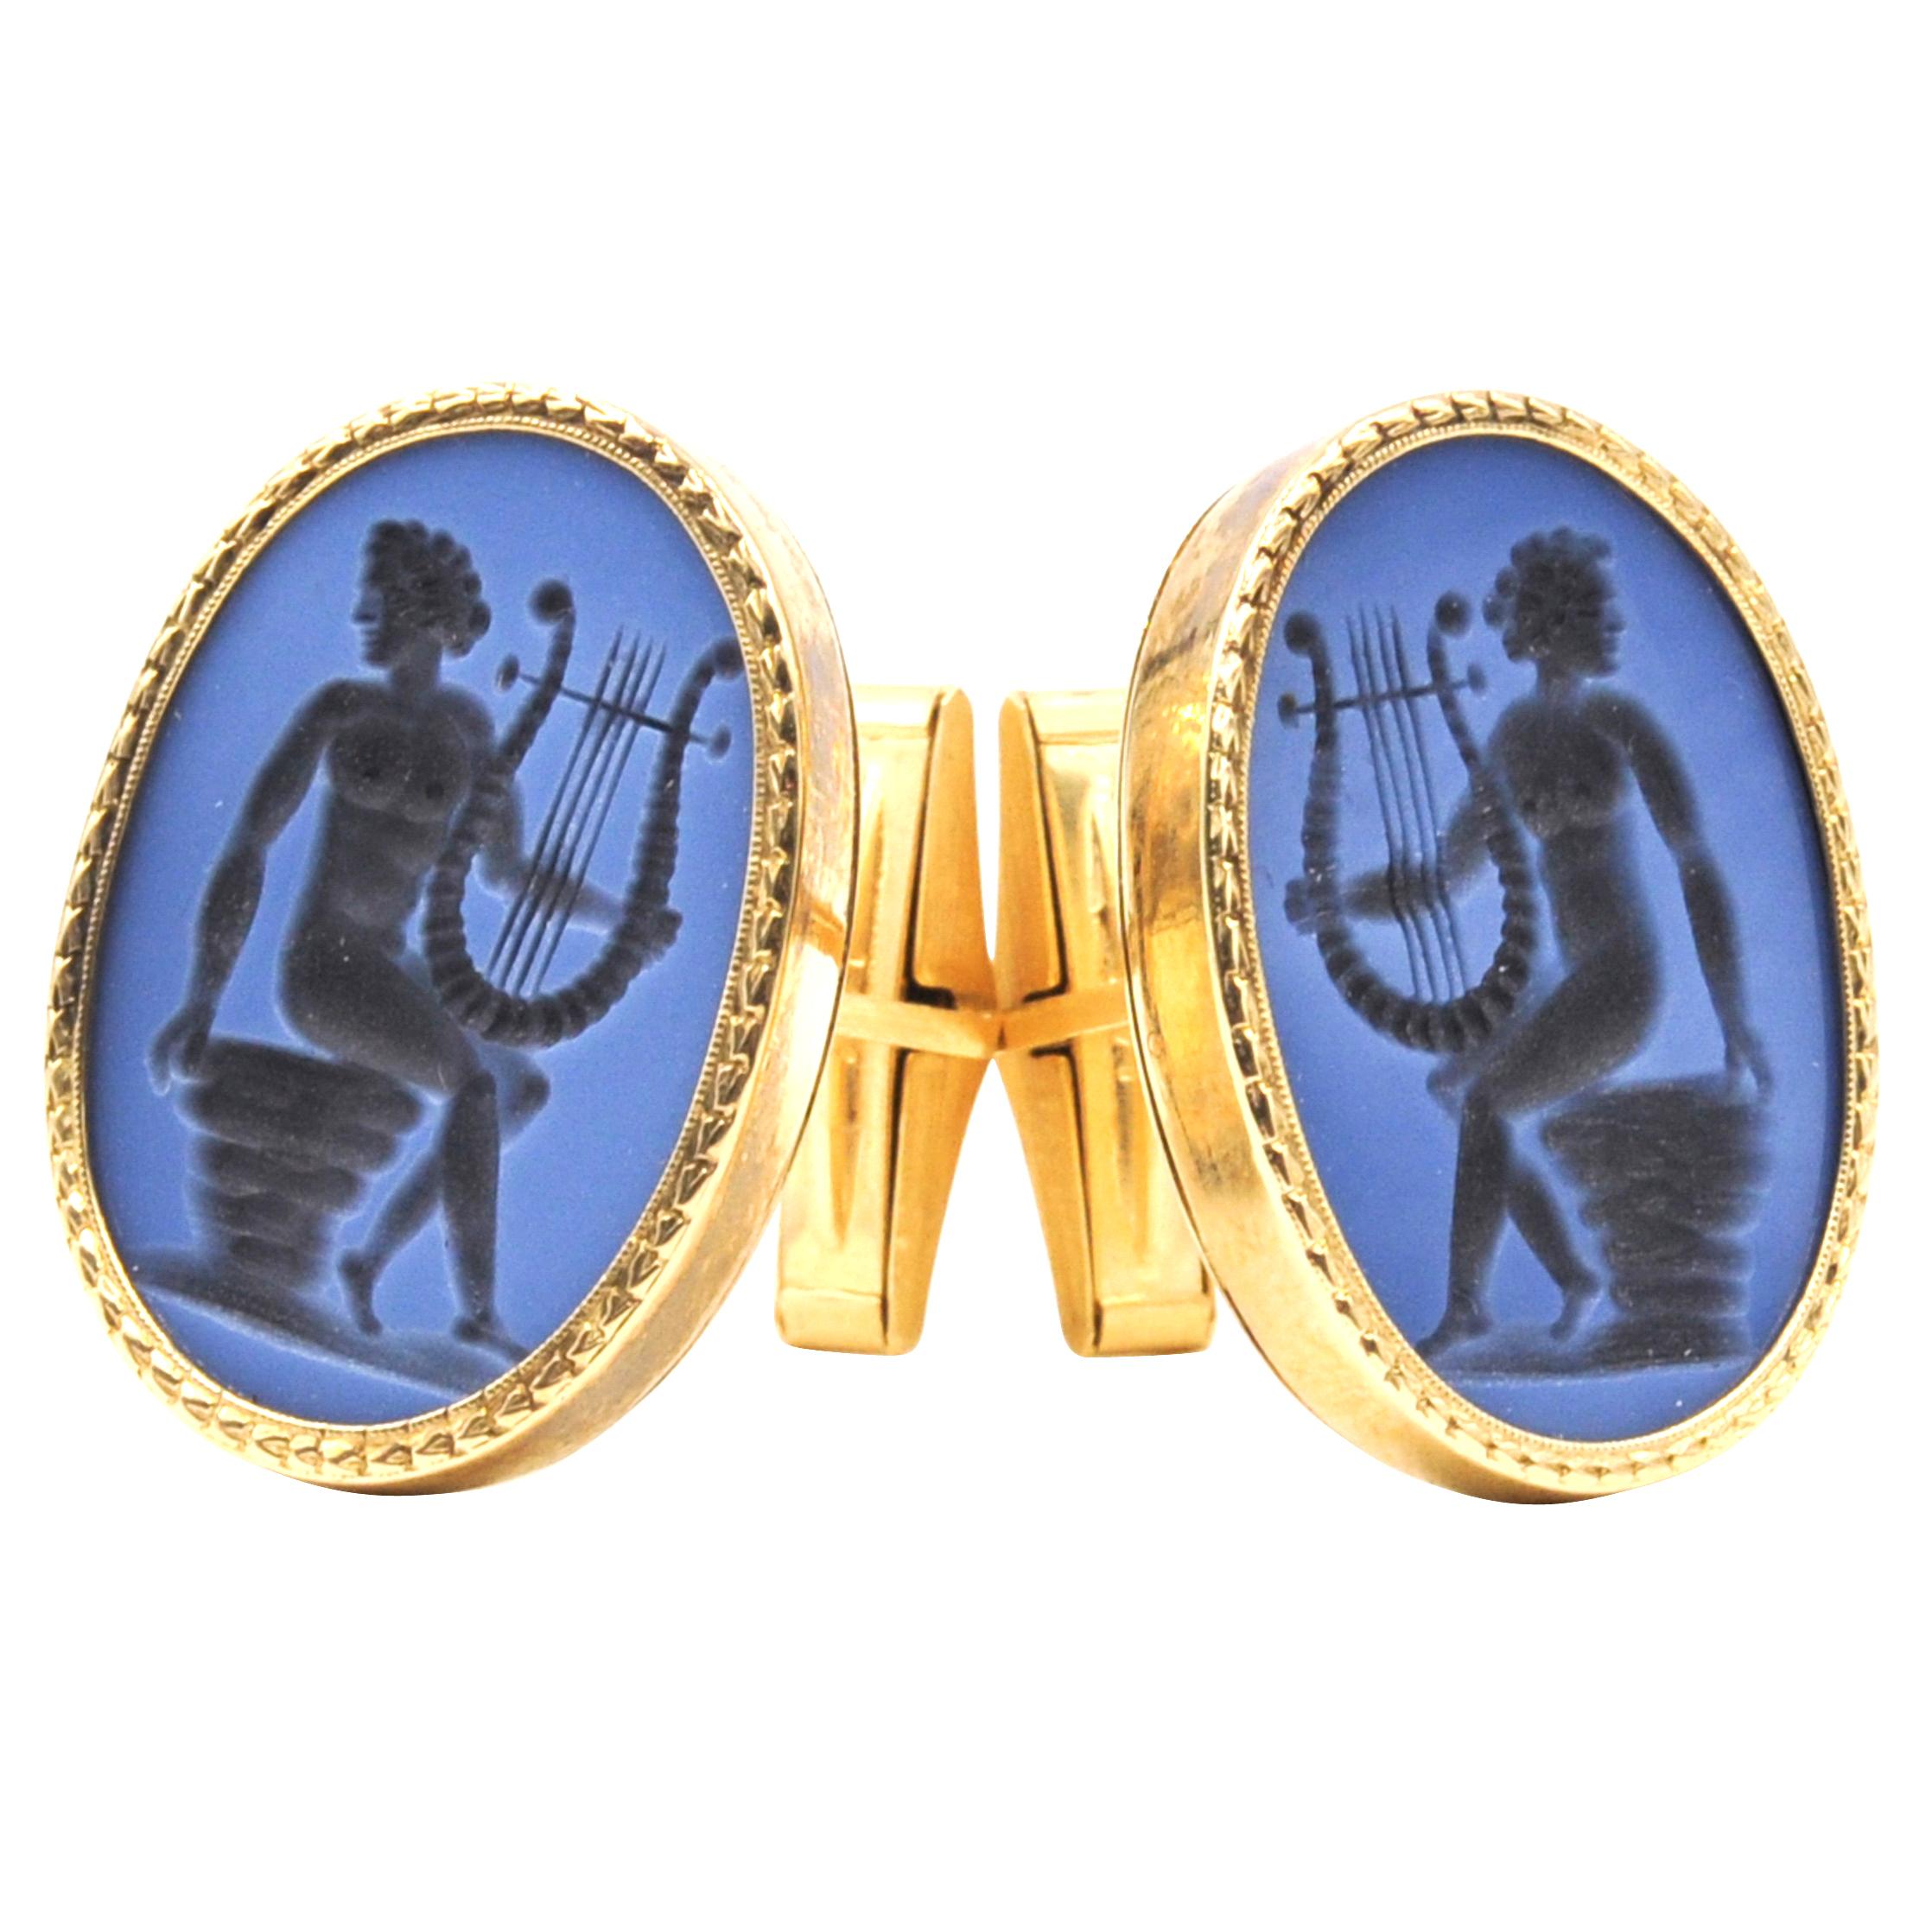 A vintage pair of cuff links crafted in a 14k yellow gold ribbed frame. The pair is set with hand carved Purple Chalcedony intaglio oval shaped gemstones, with angelic harp motifs. This pair is sure to stand out in a crowd. Pair weighs 22.6 Grams.